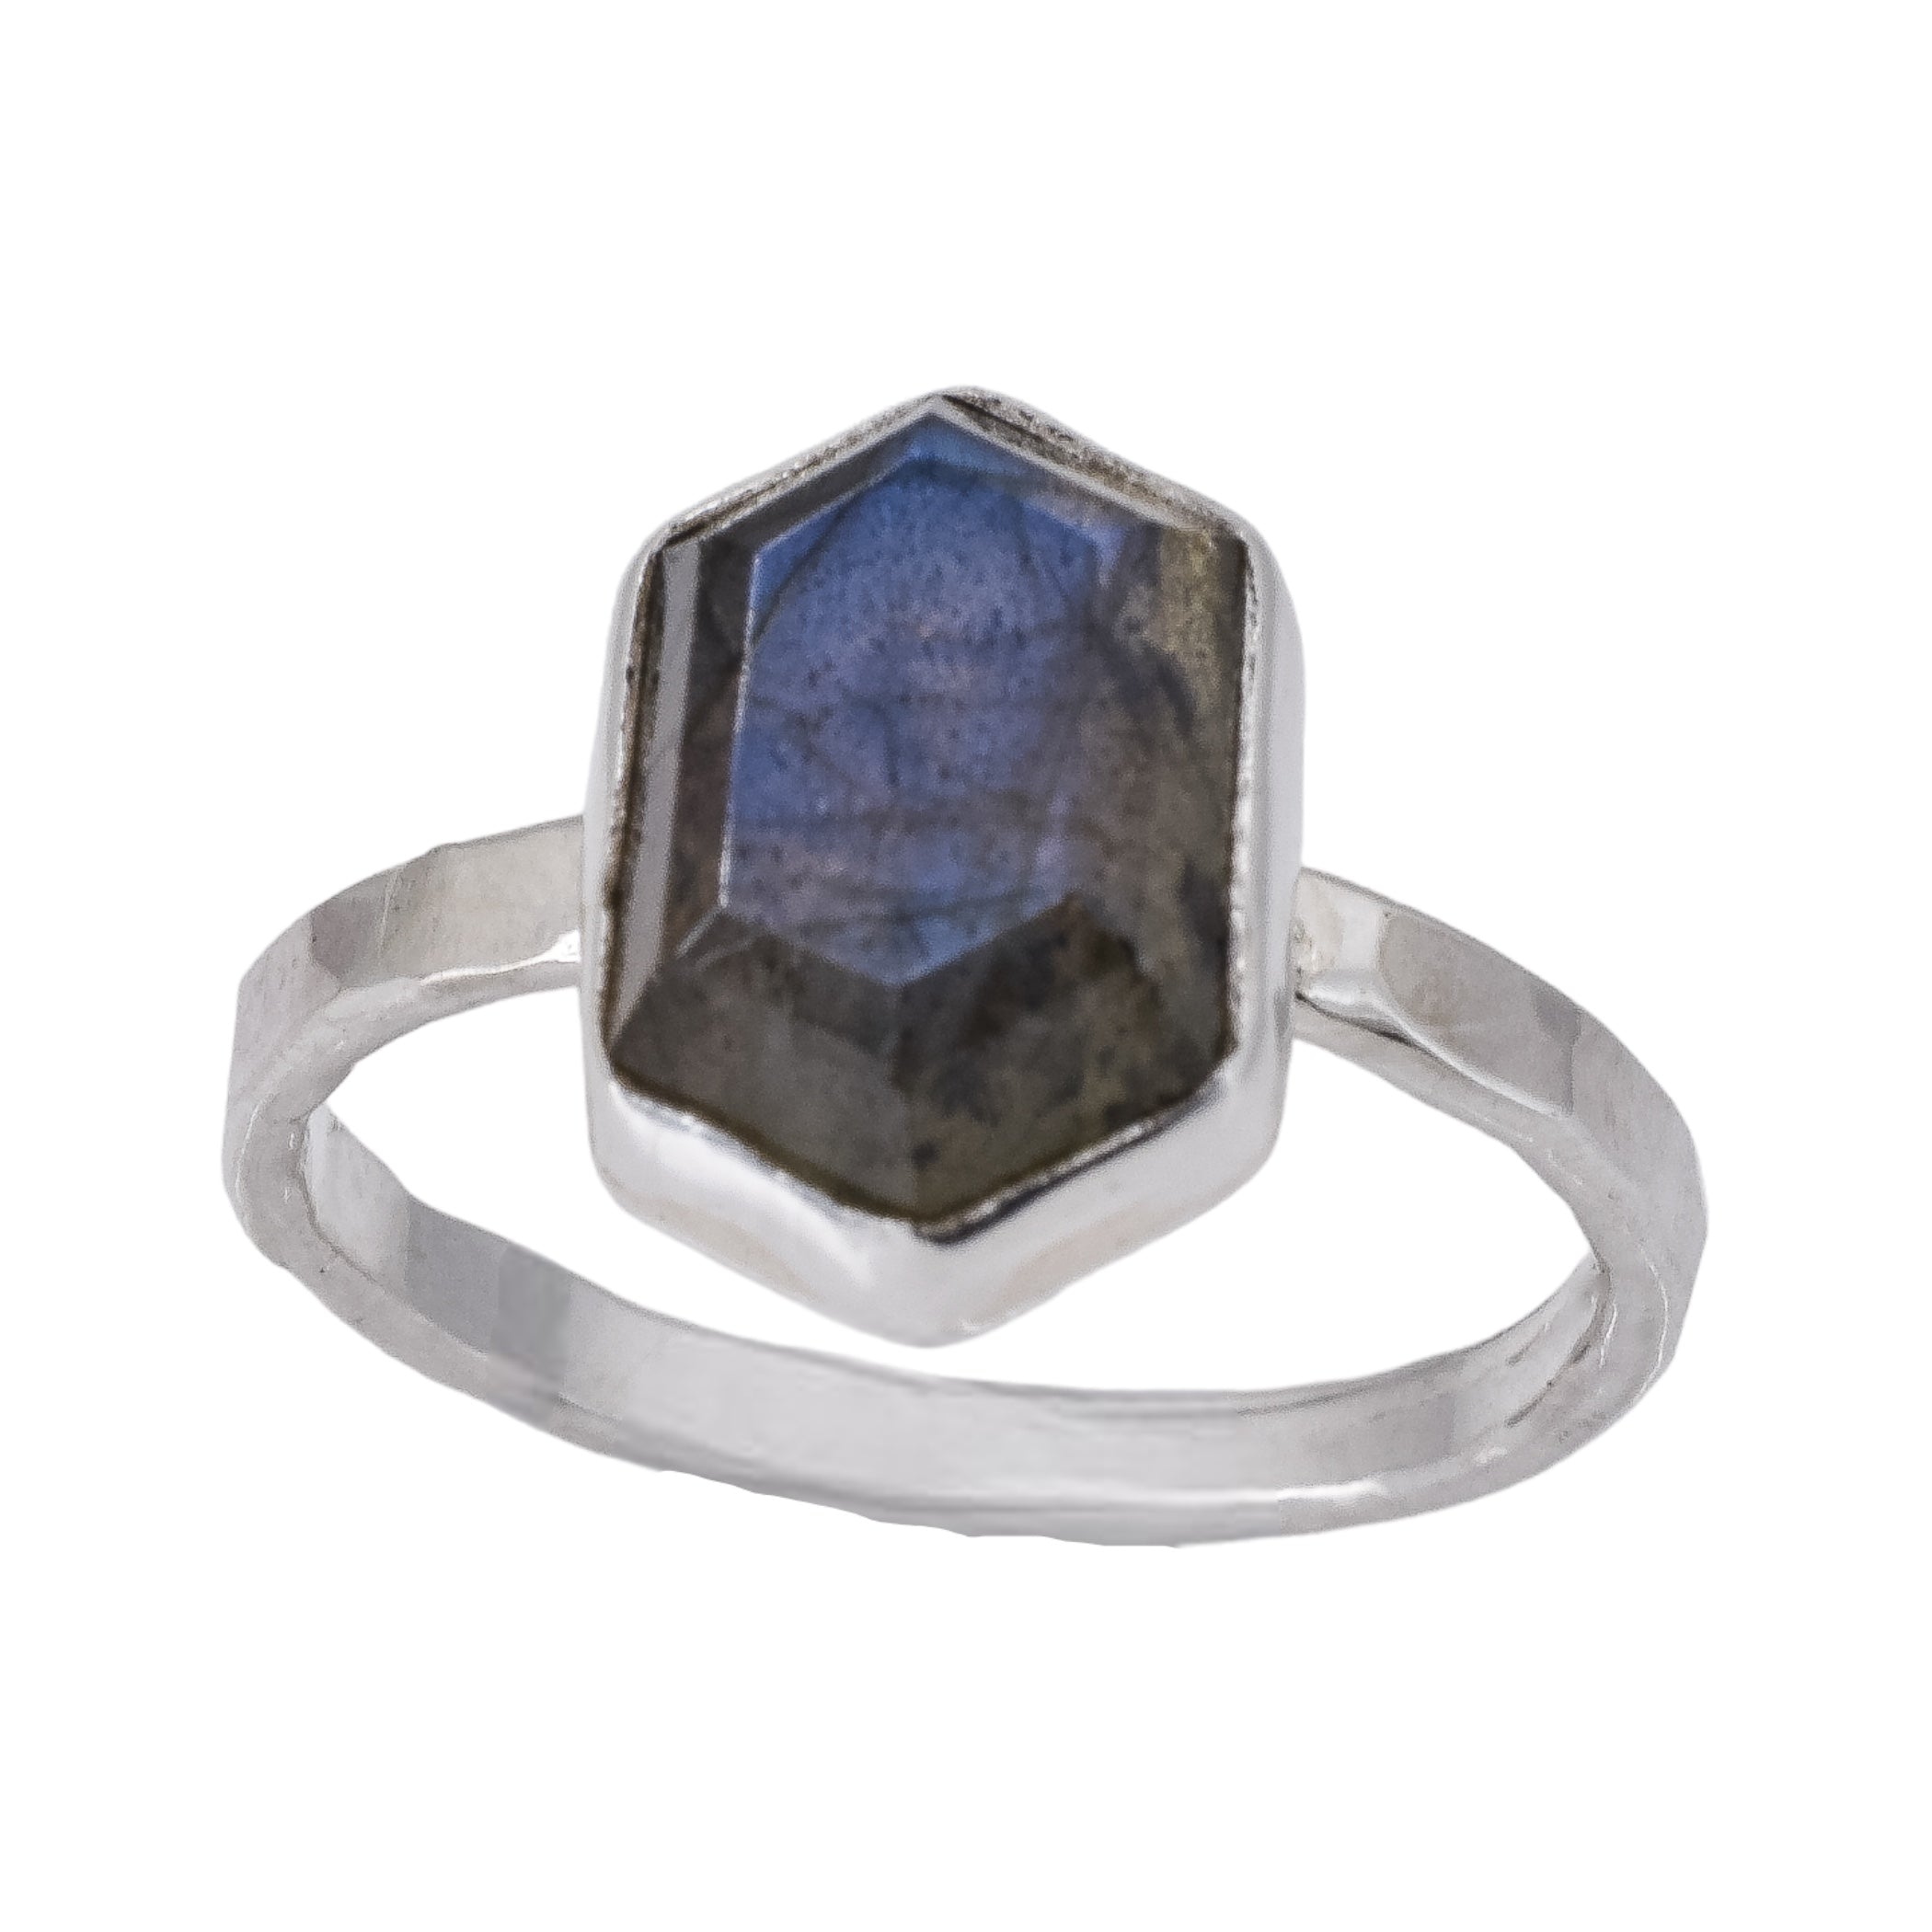 Stacking faceted sterling silver ring with a hexagonal shaped labradorite stone.